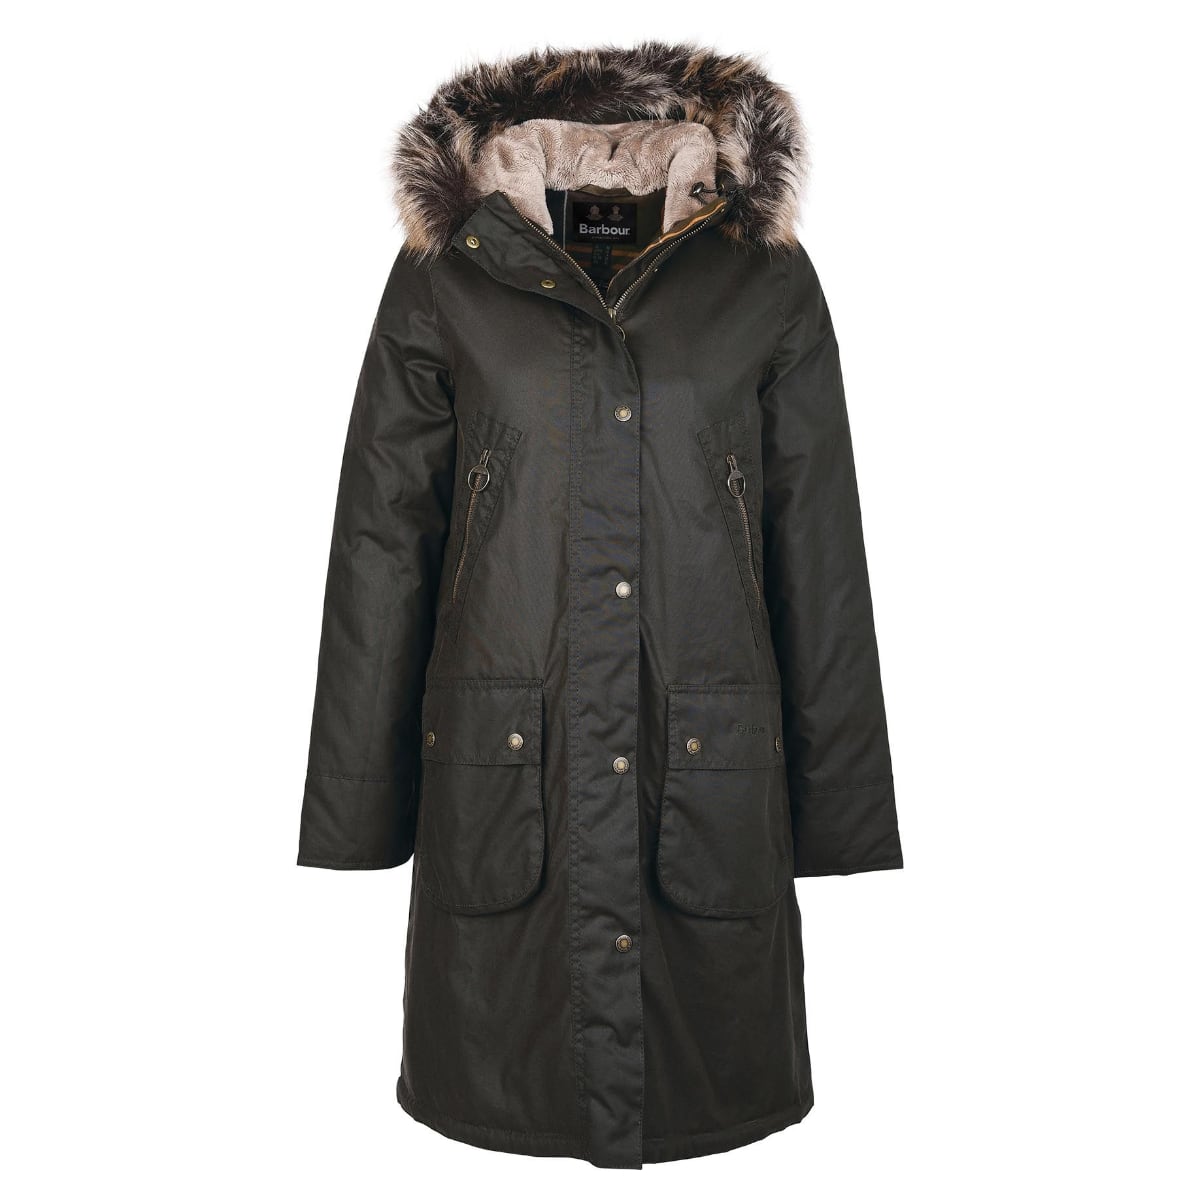 Barbour Stavia Women's Waxed Jacket | Olive